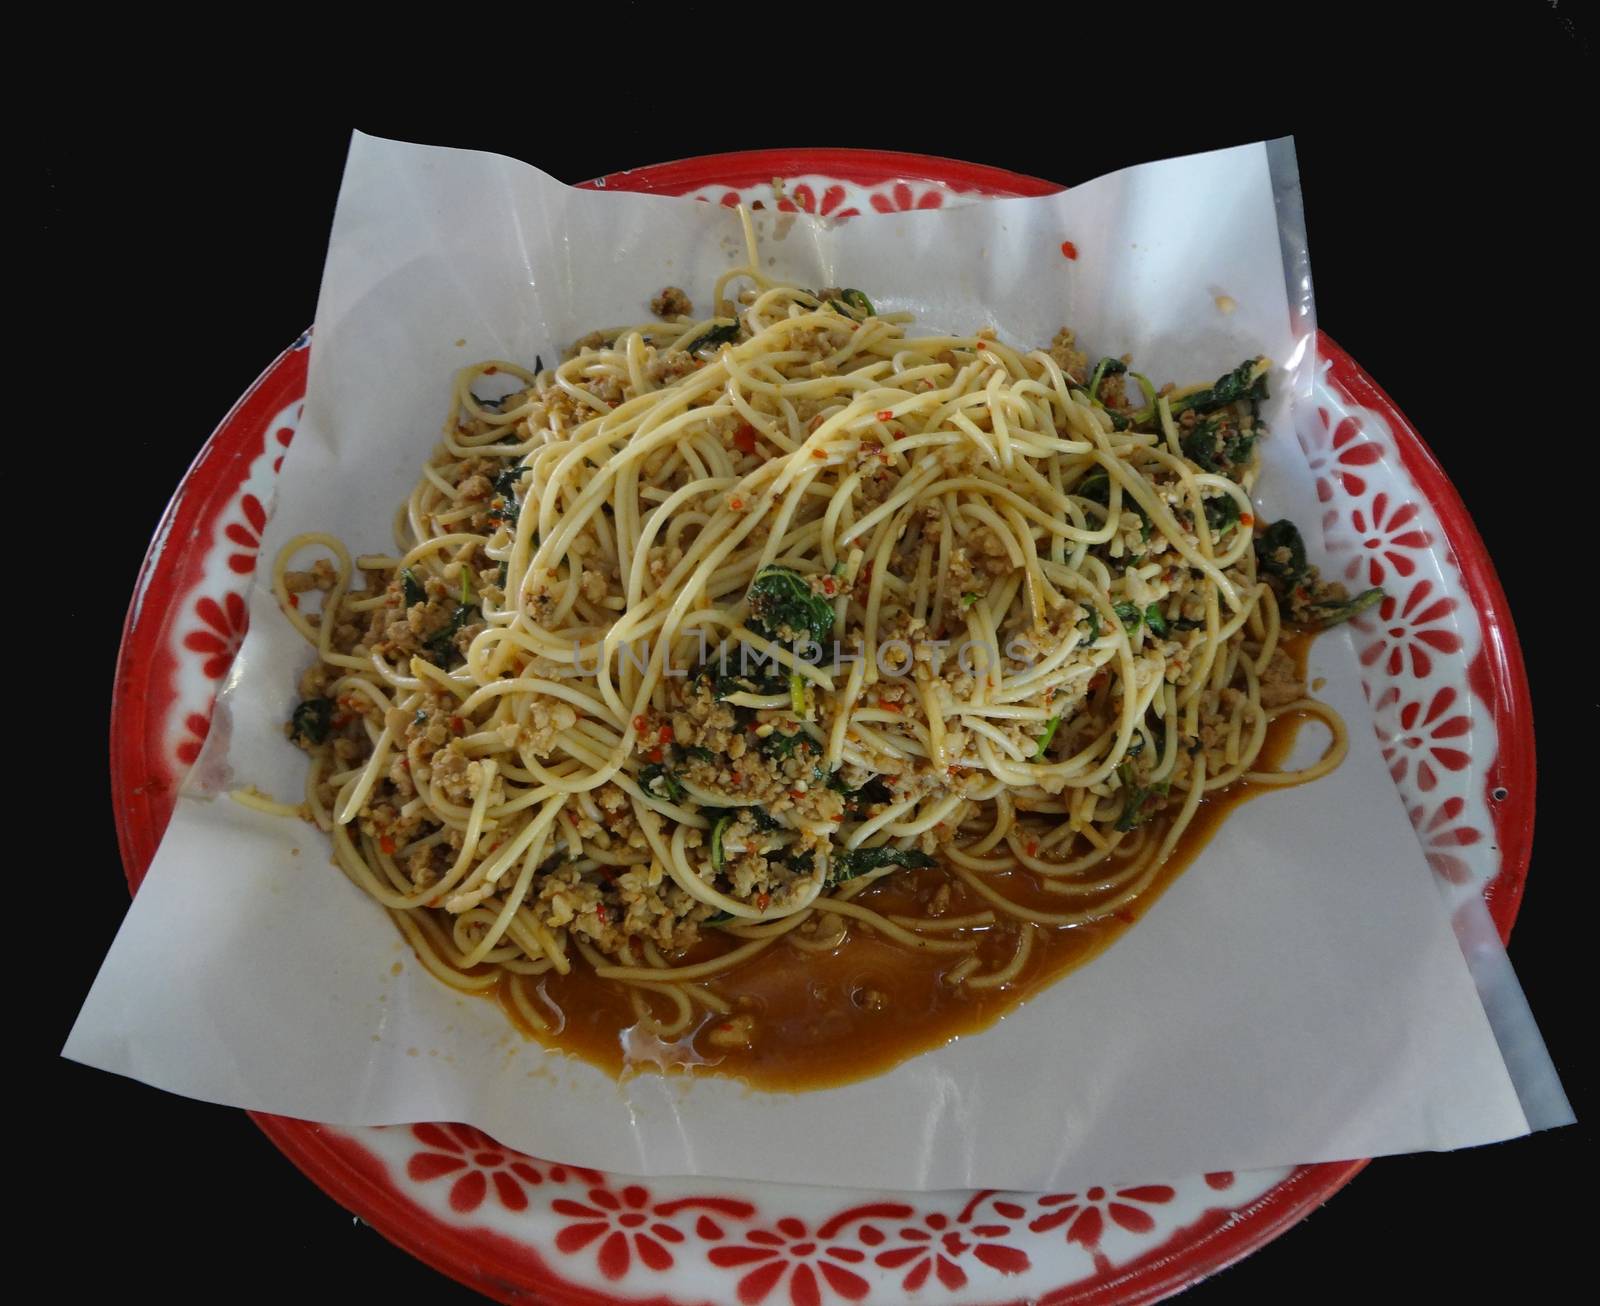 Spicy Stir Fried Spaghetti or Spicy Stir-fried Spaghetti with Chopped Chicken and holy basil on tray, Thai style food